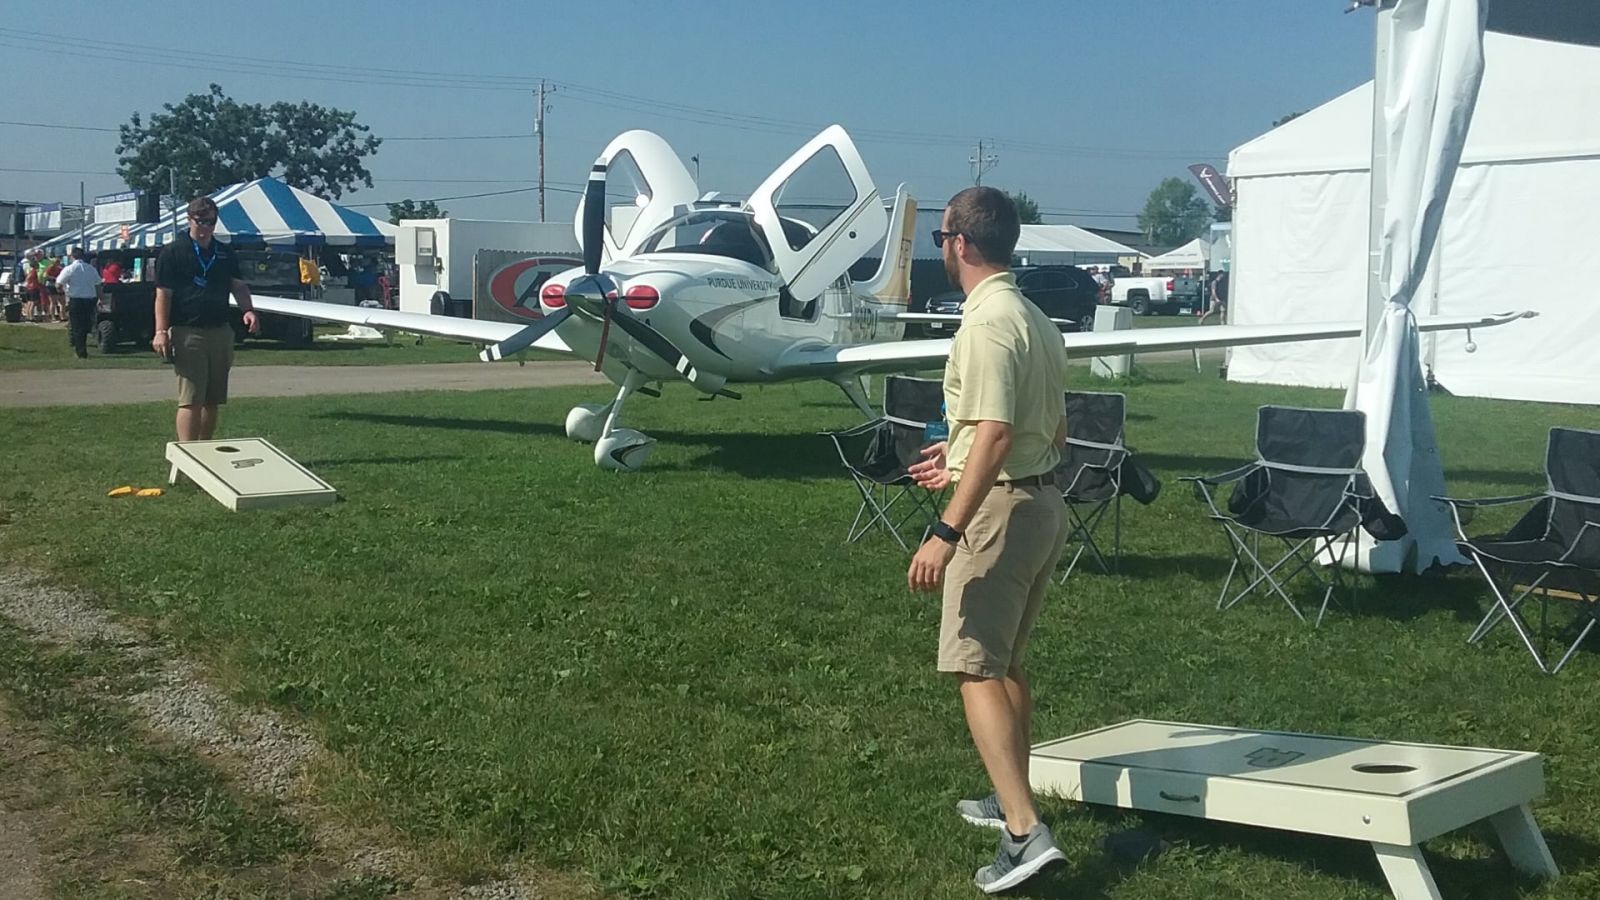 Purdue aviation technology students relax with a game of cornhole between events at EAA AirVenture Oshkosh